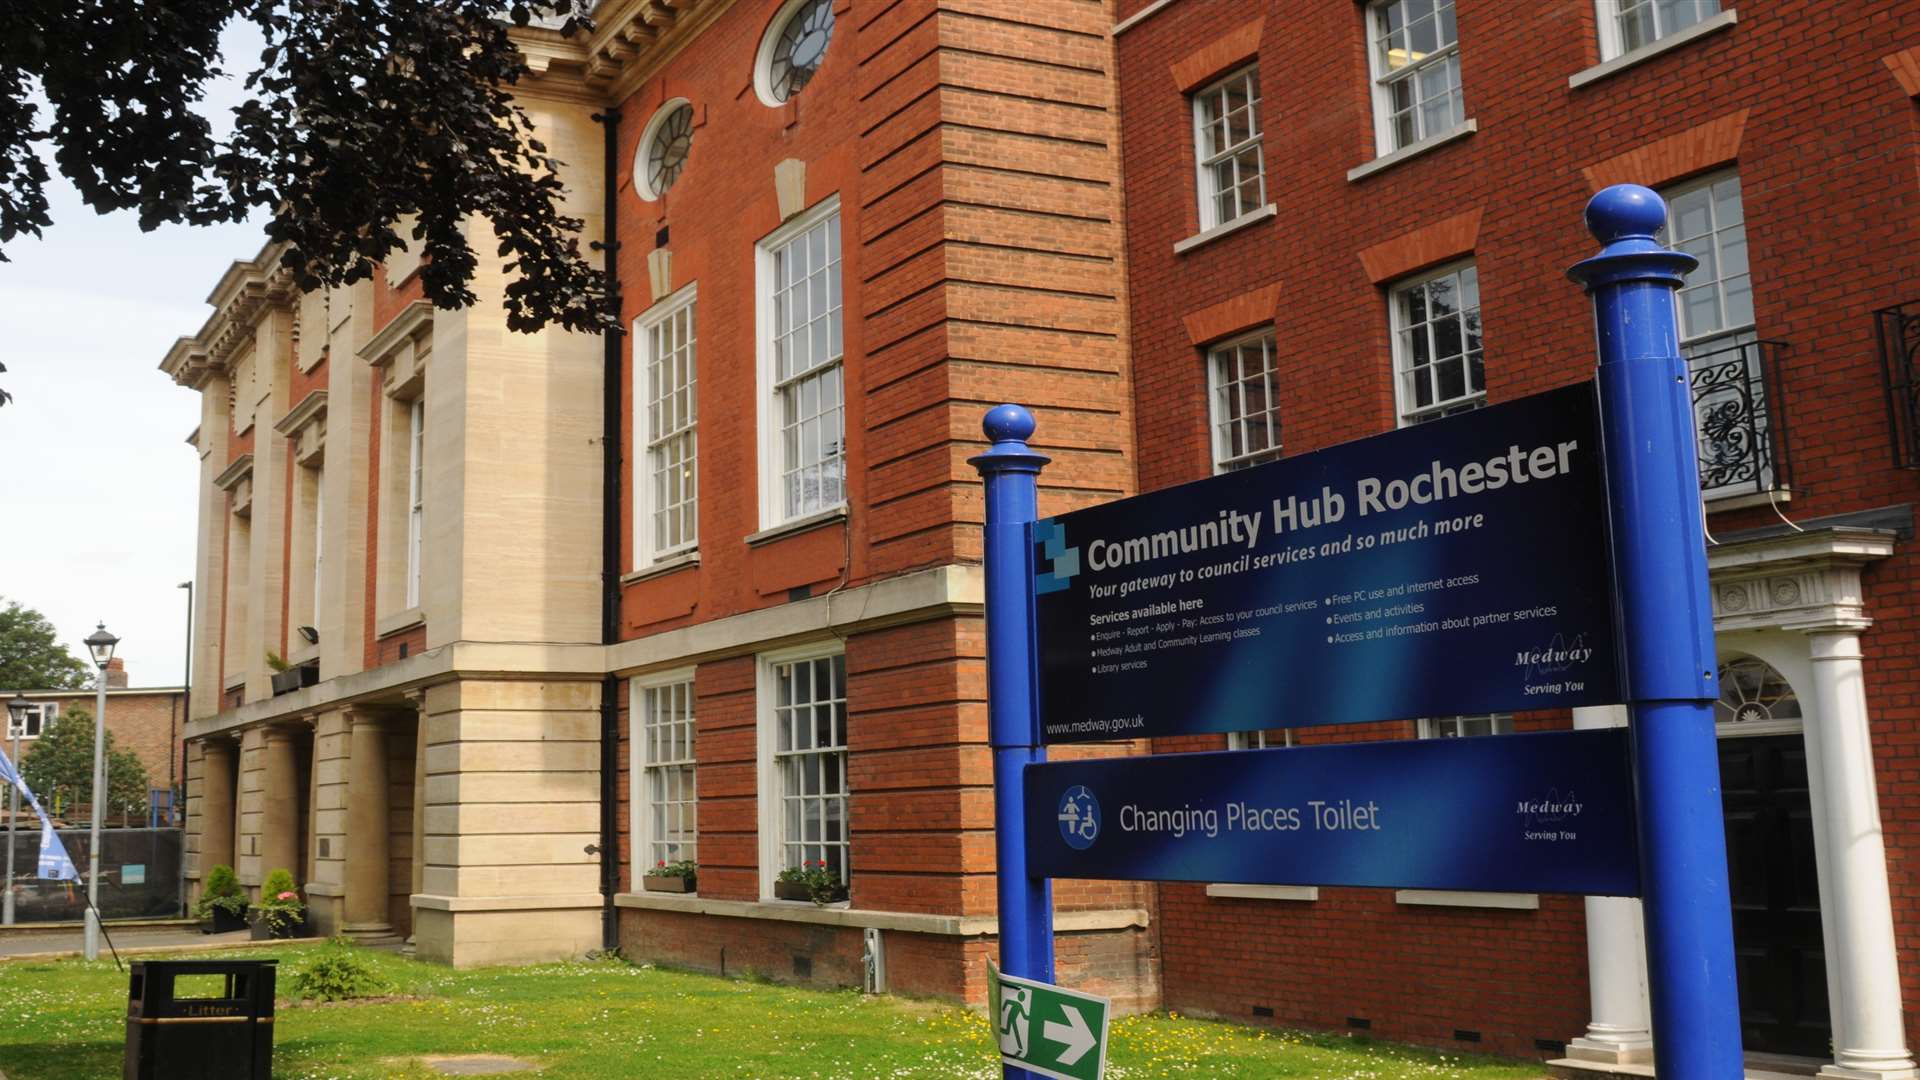 Rochester, like all Medway Community Hubs, will be closed for six days over Christmas.